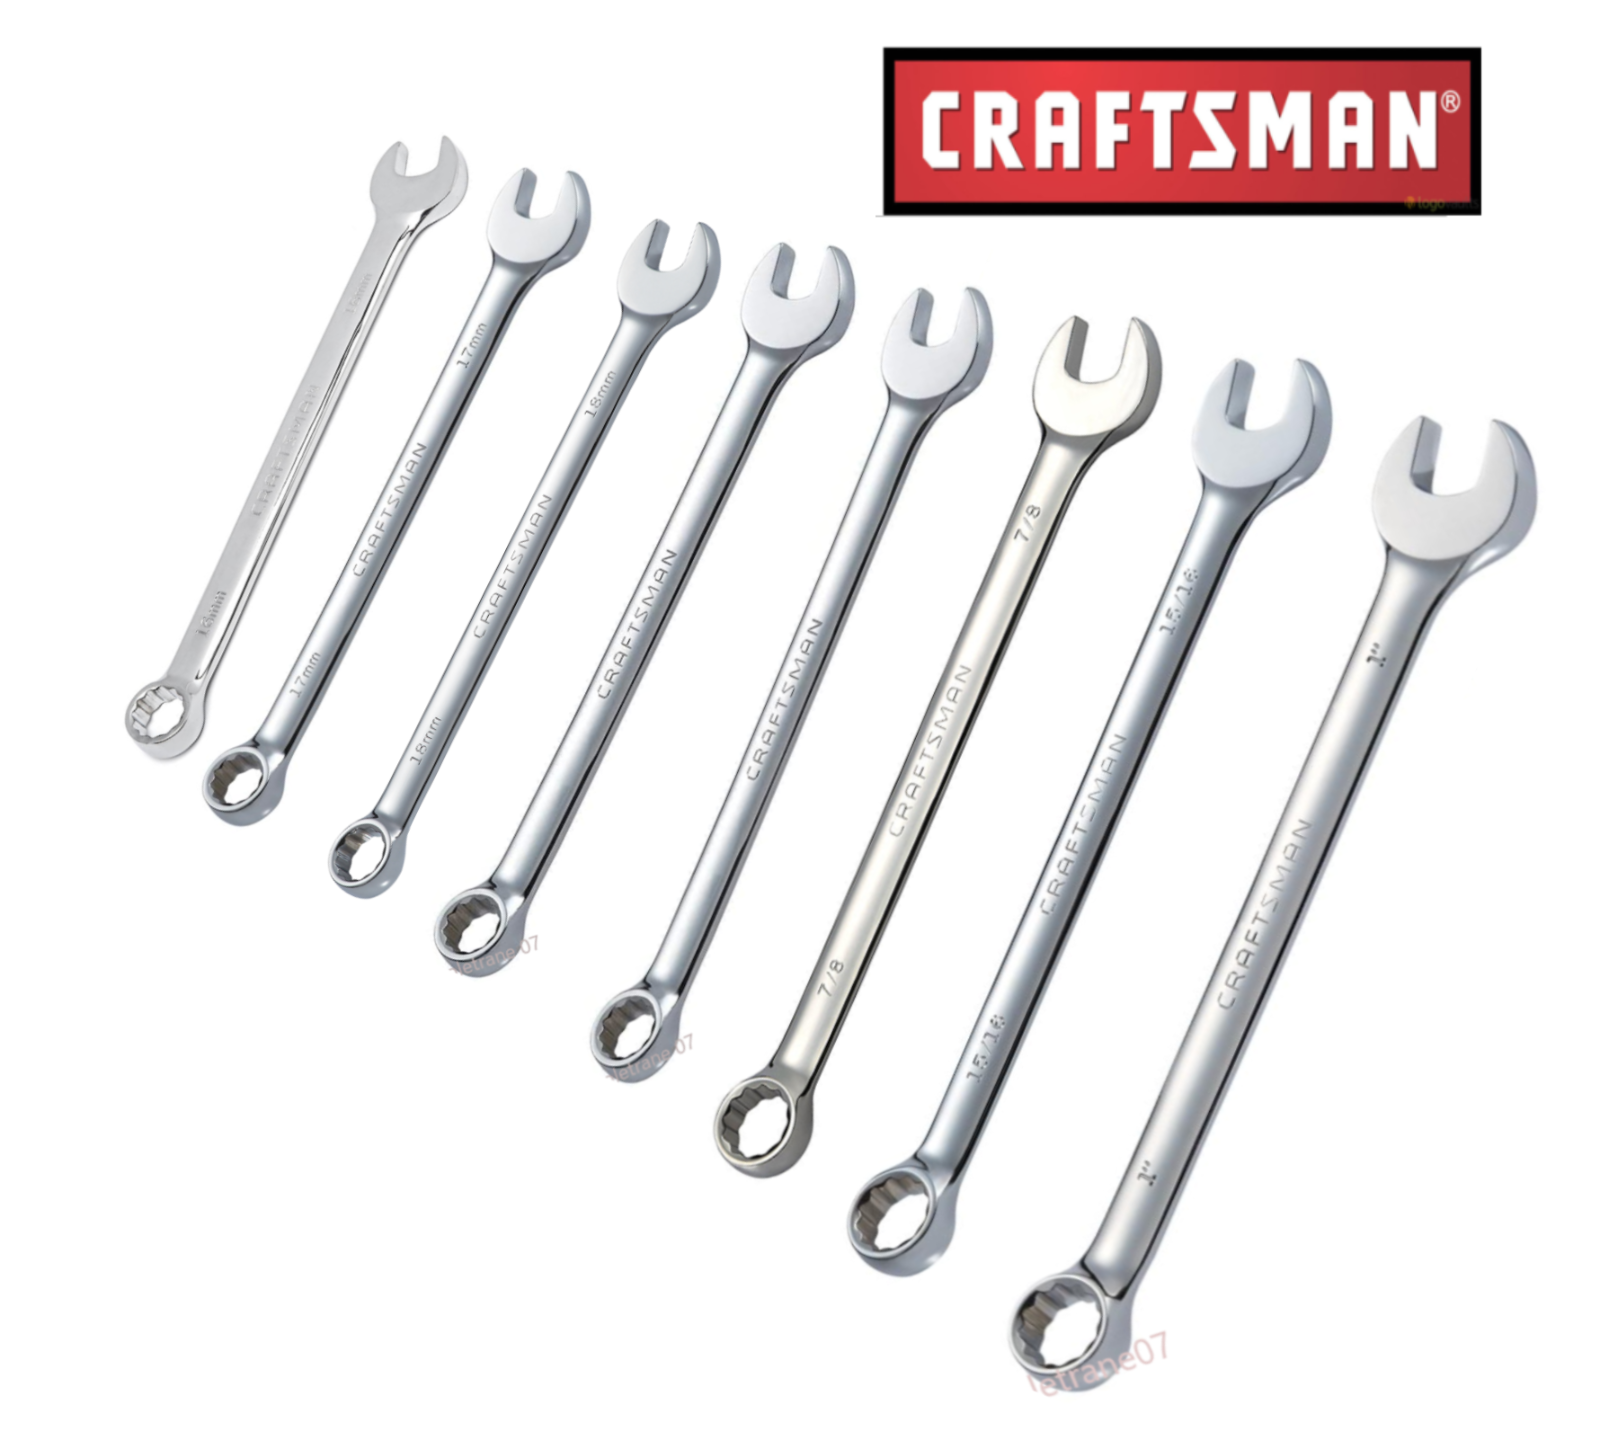 New Craftsman Long Pattern Sae & Metric Combination Wrench Choose Size Or Set